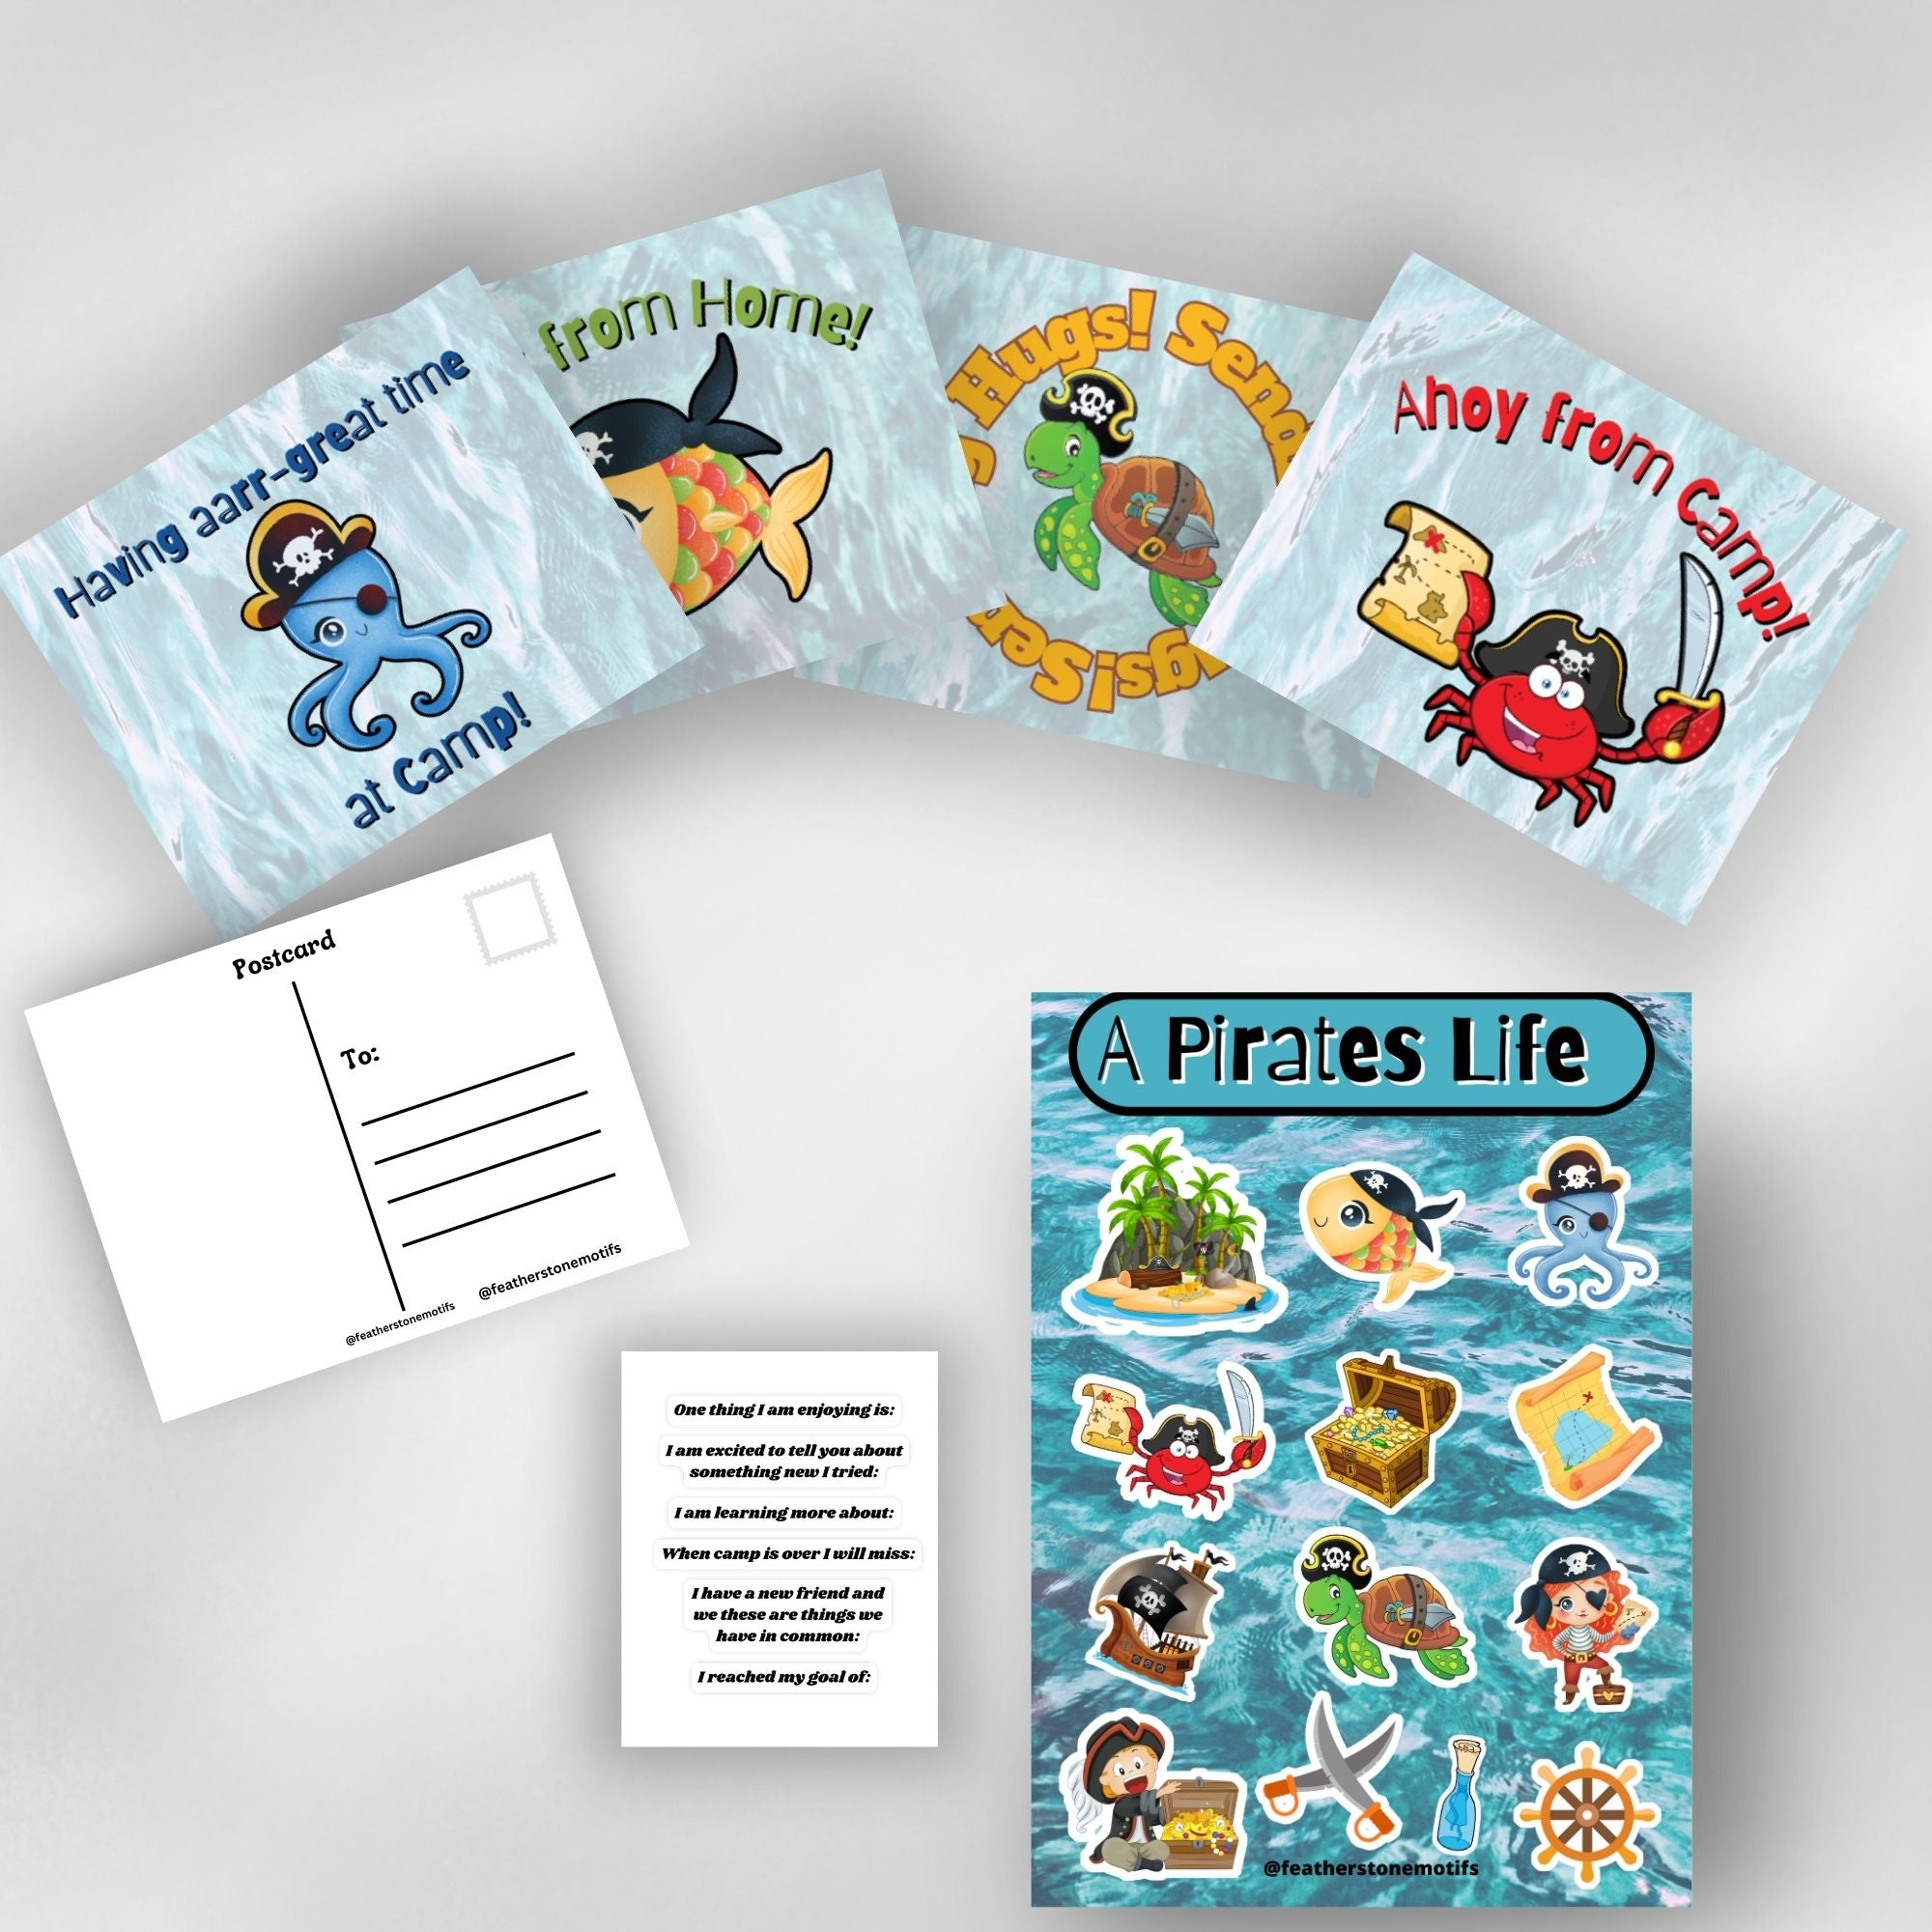 This image shows the full Pirate themed Camp Postcard Kit.